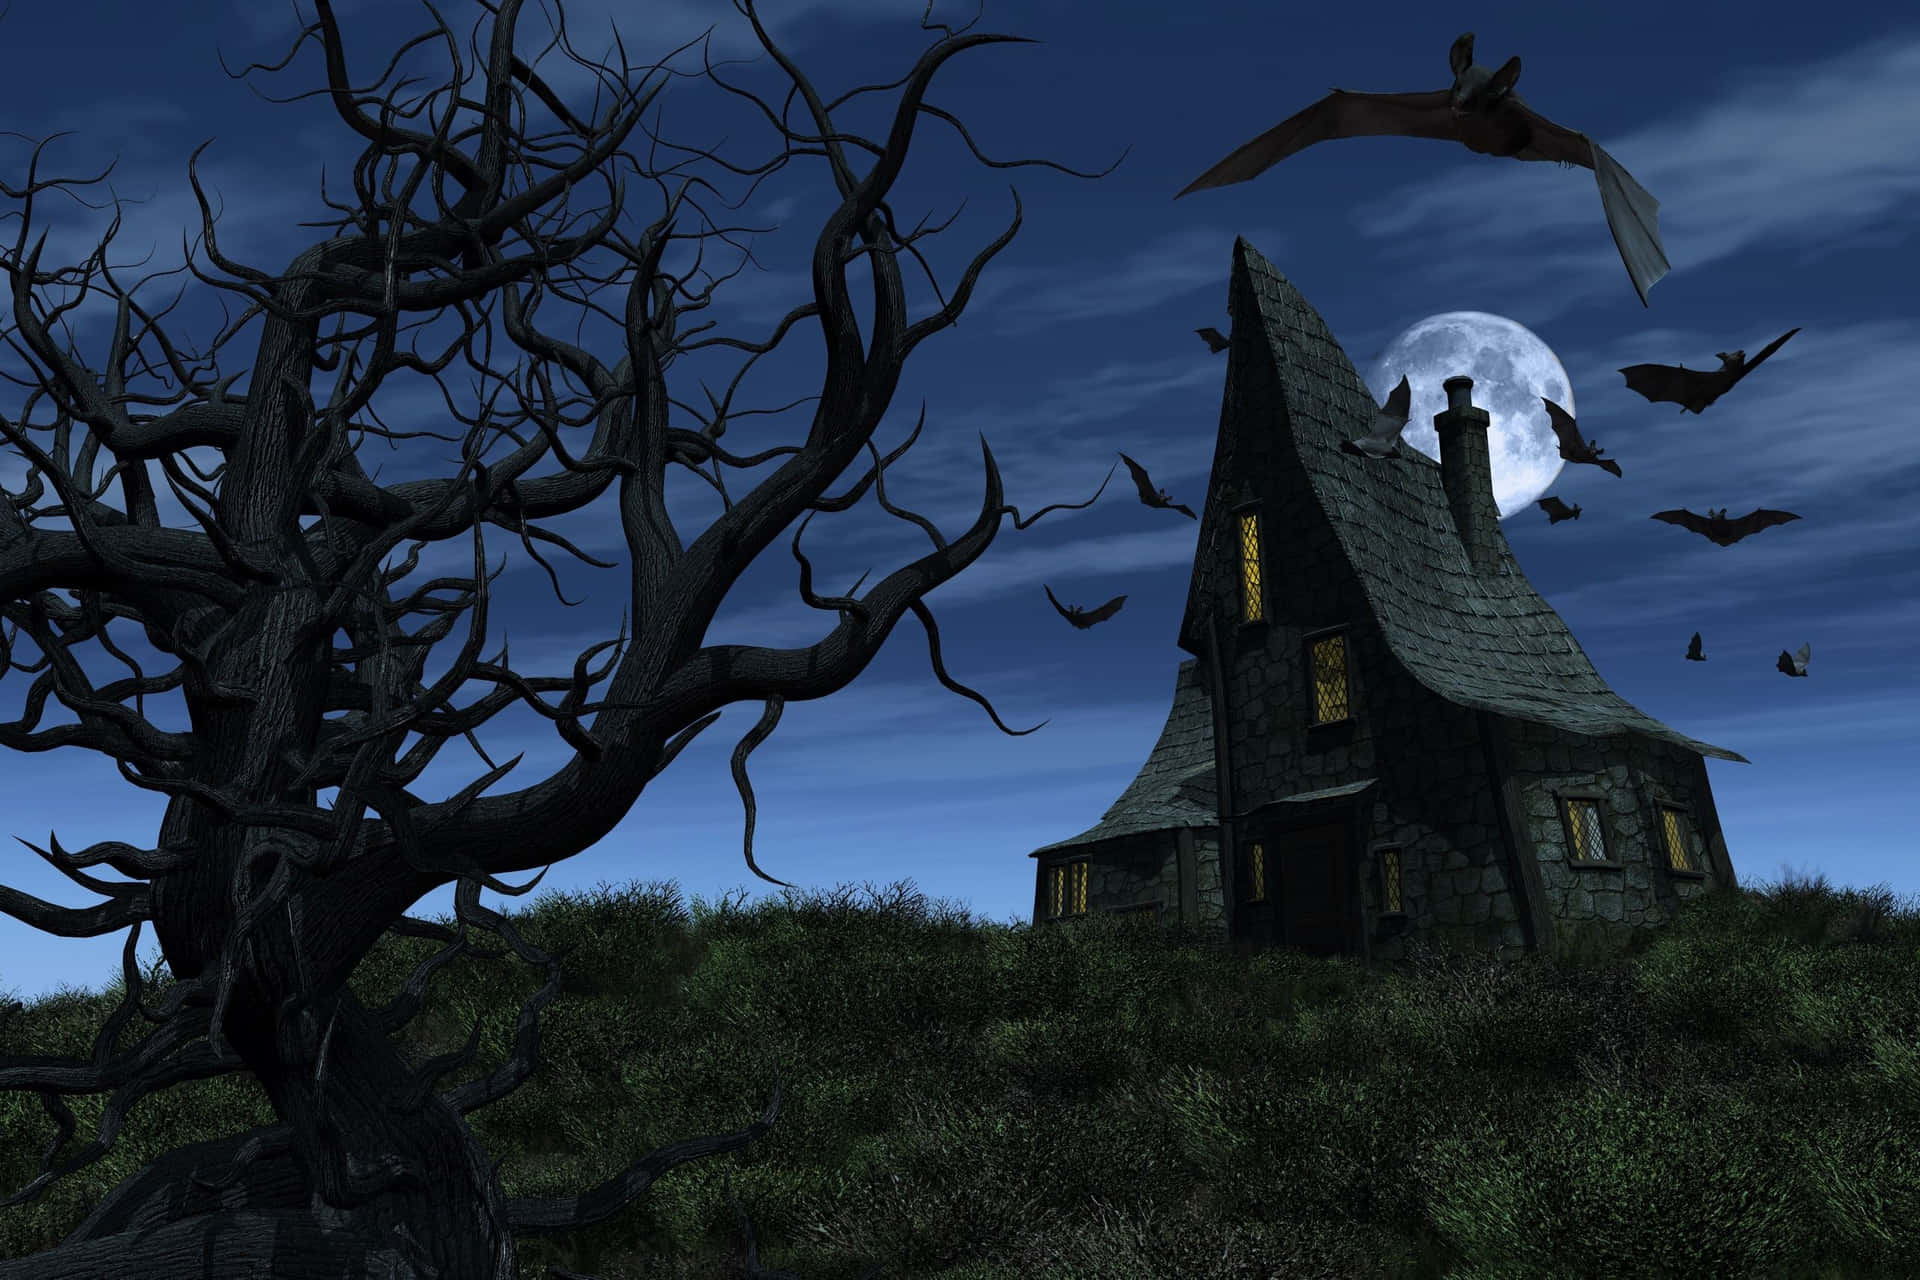 Experience a Spooky Halloween with Haunted House and Jack O'Lanterns